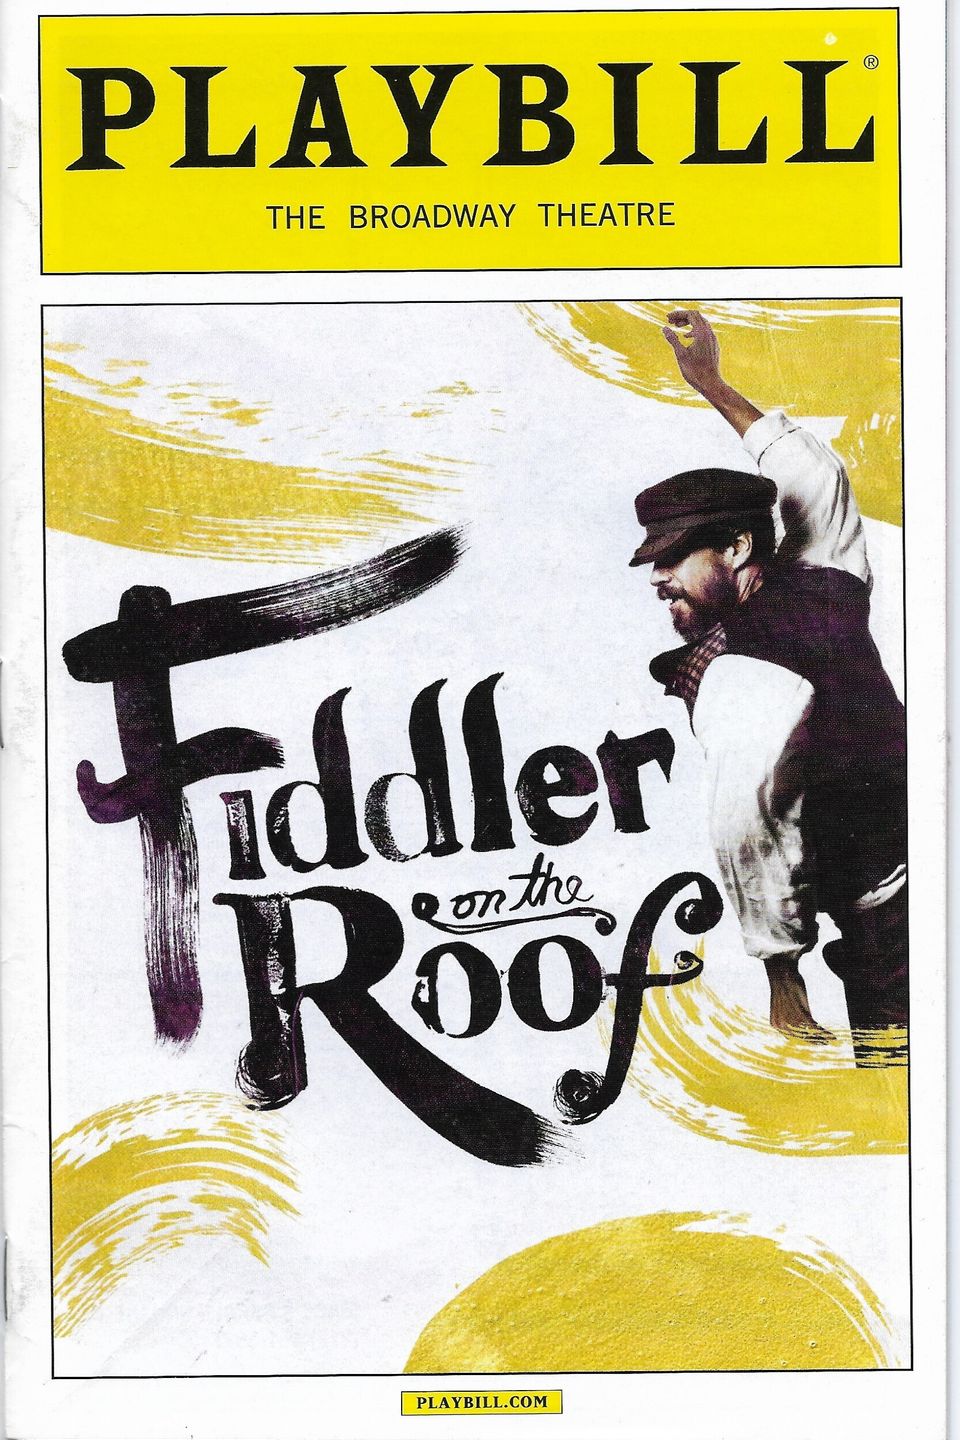 Fiddler on the roof